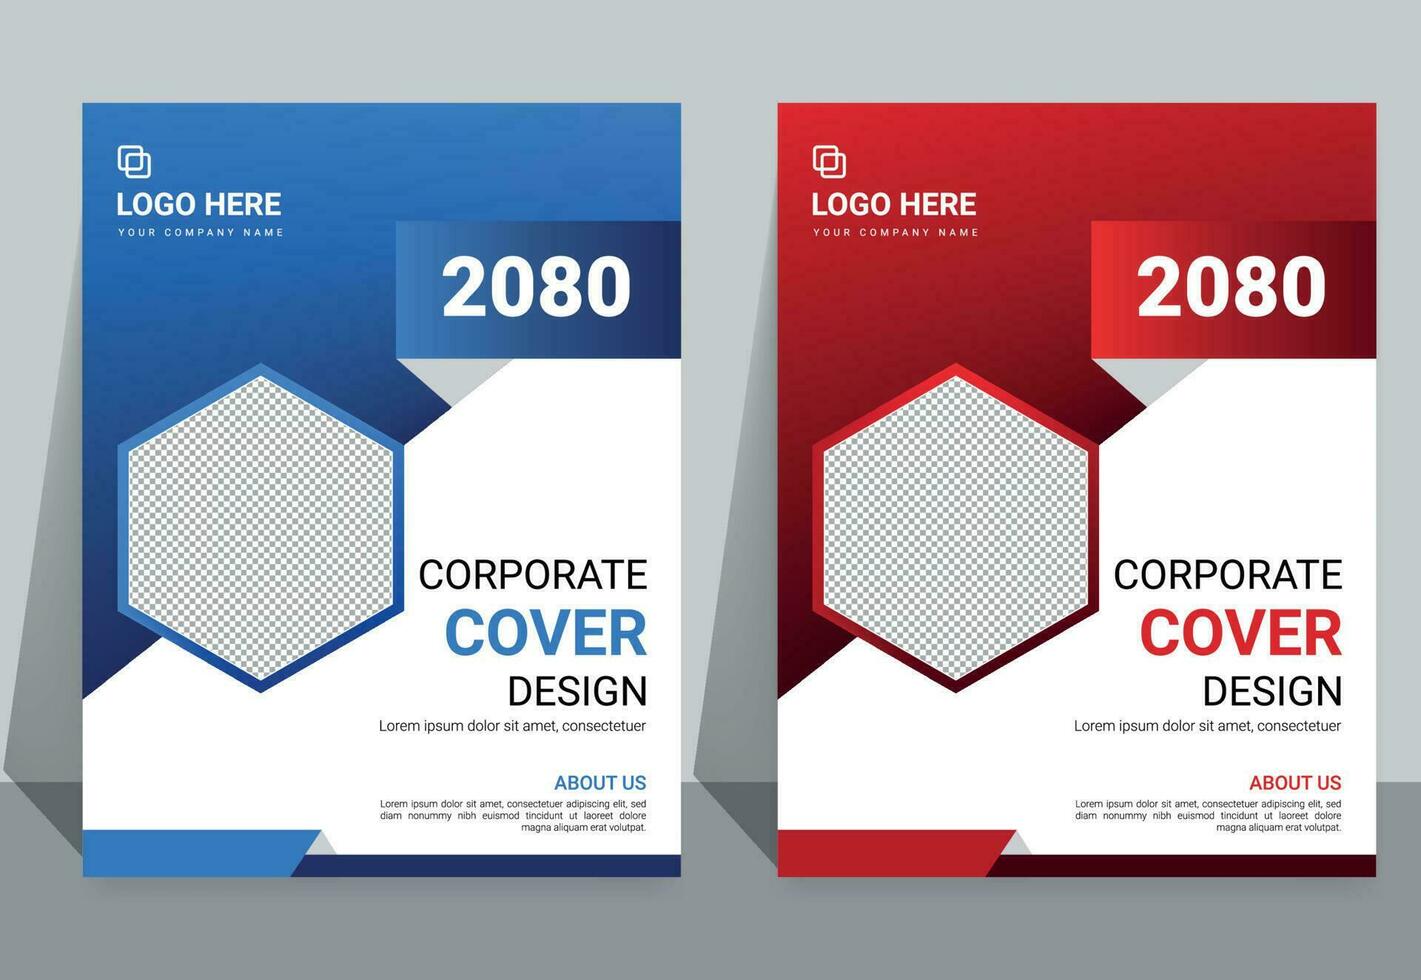 Business brochure flyer design a4 template. Vector illustration. Easy to adapt to Brochure, Annual Report, Magazine, Poster, Corporate Presentation, Portfolio, Flyer, Banner for Website.